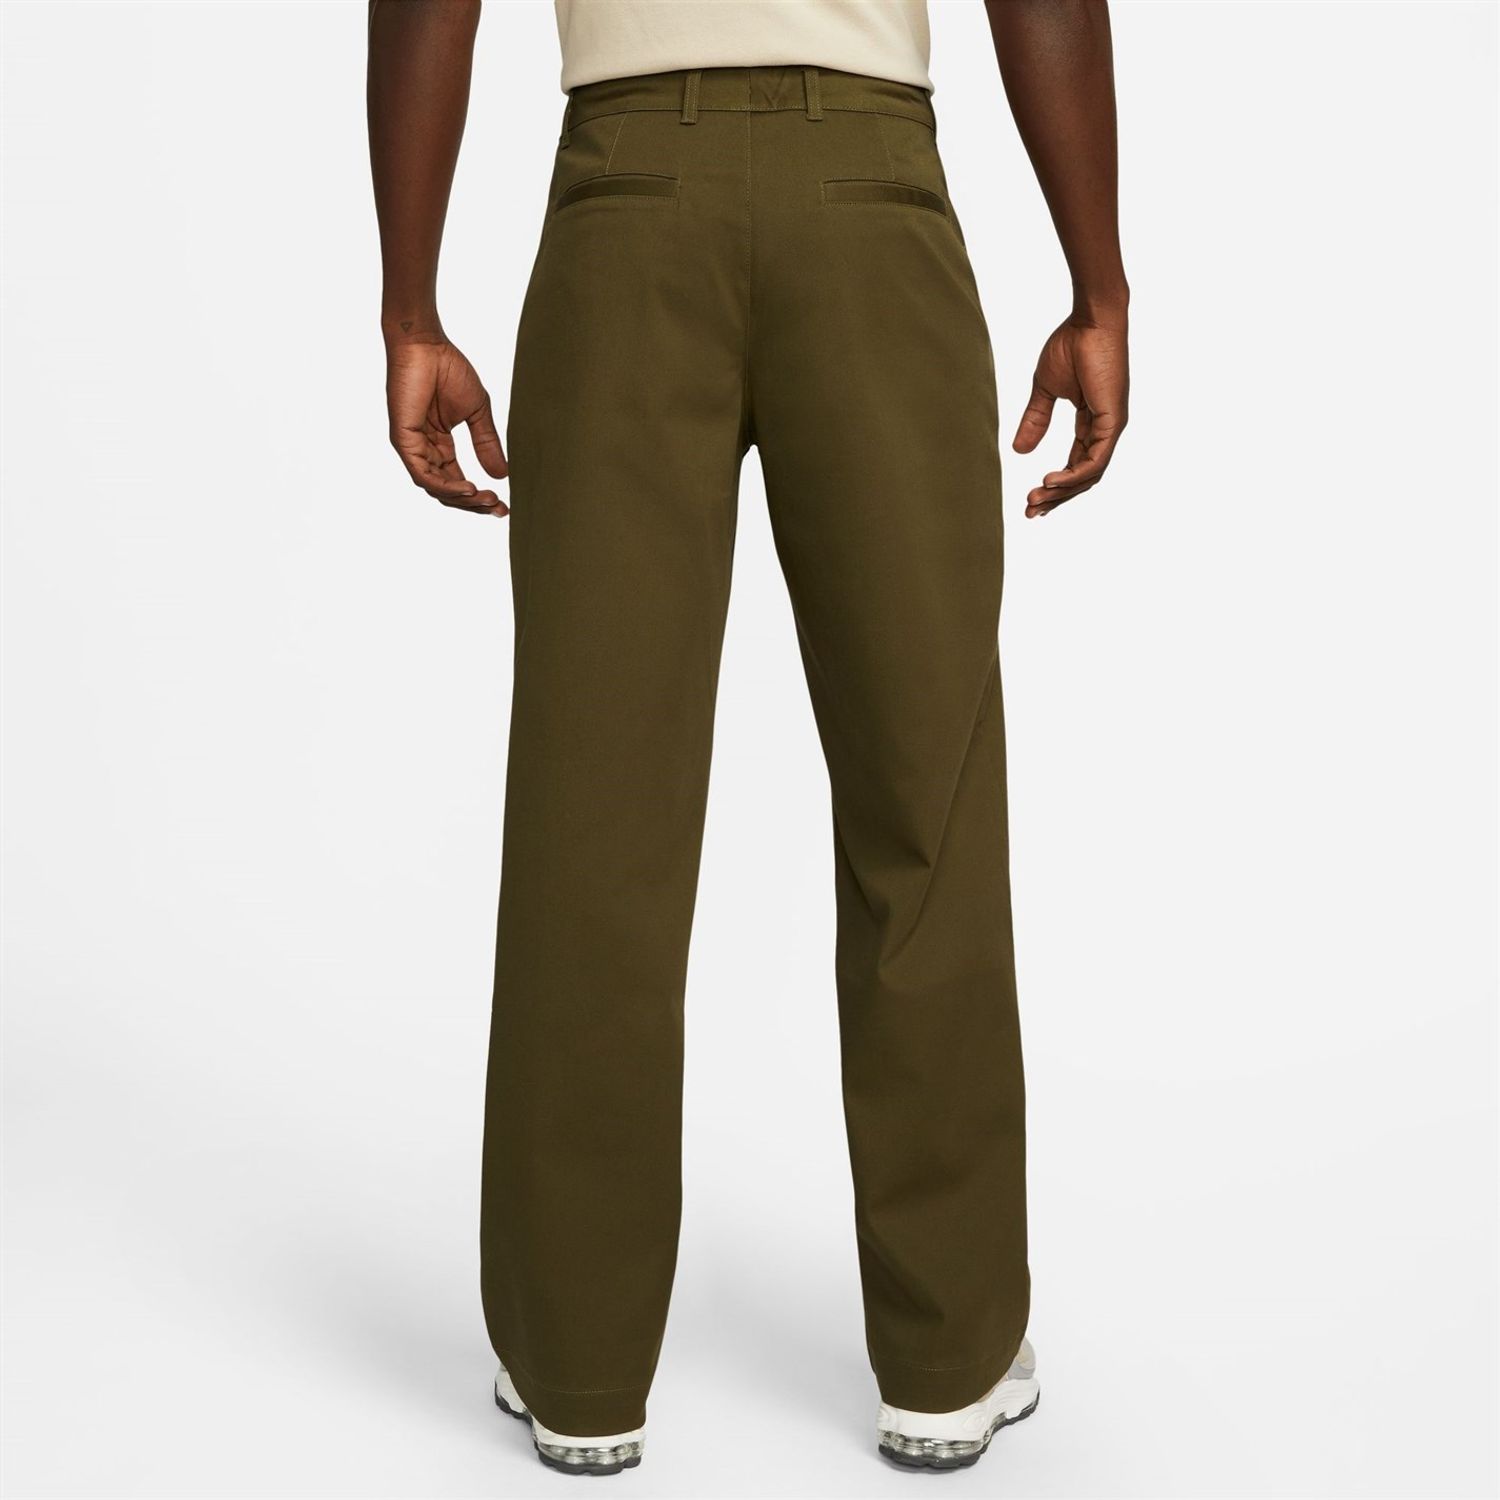 Green Nike Chinos - Get The Label